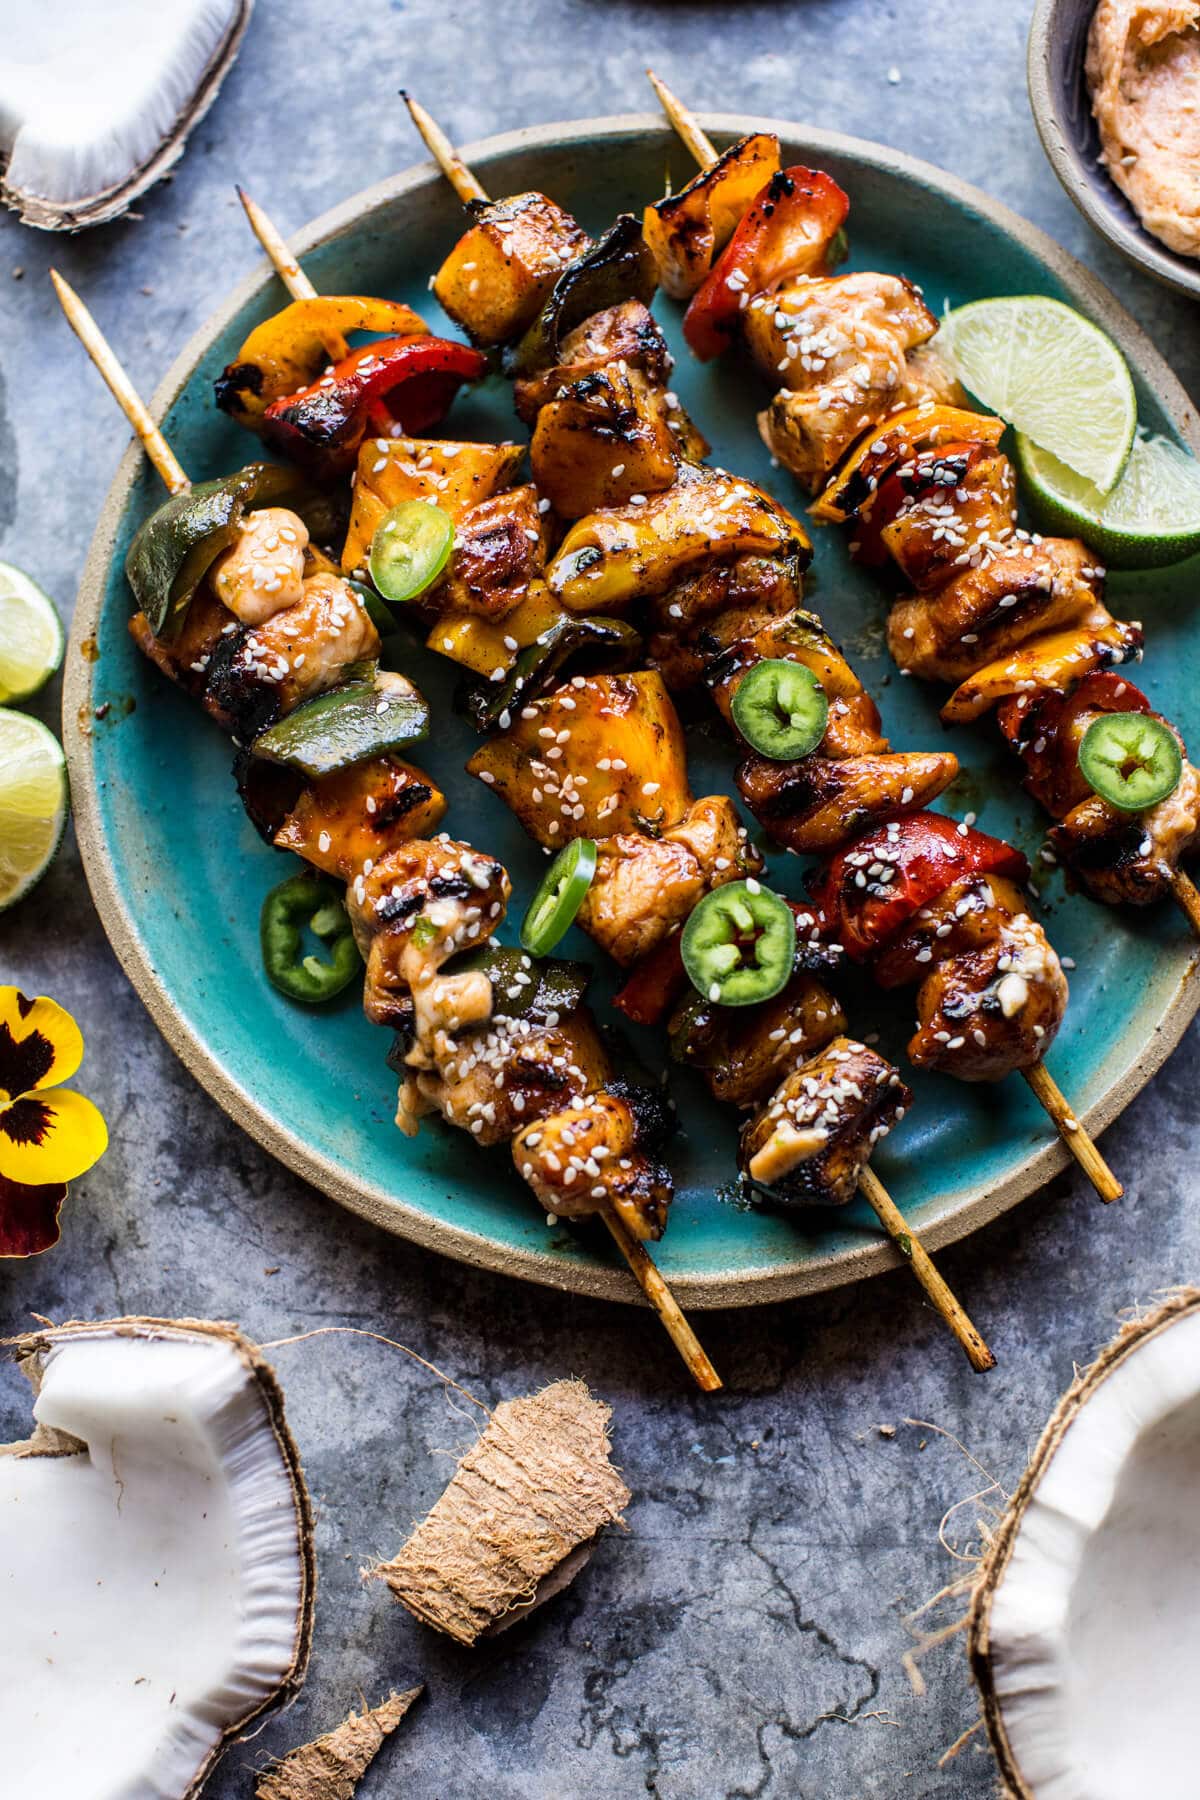 How to Set Up Grill for Skewer